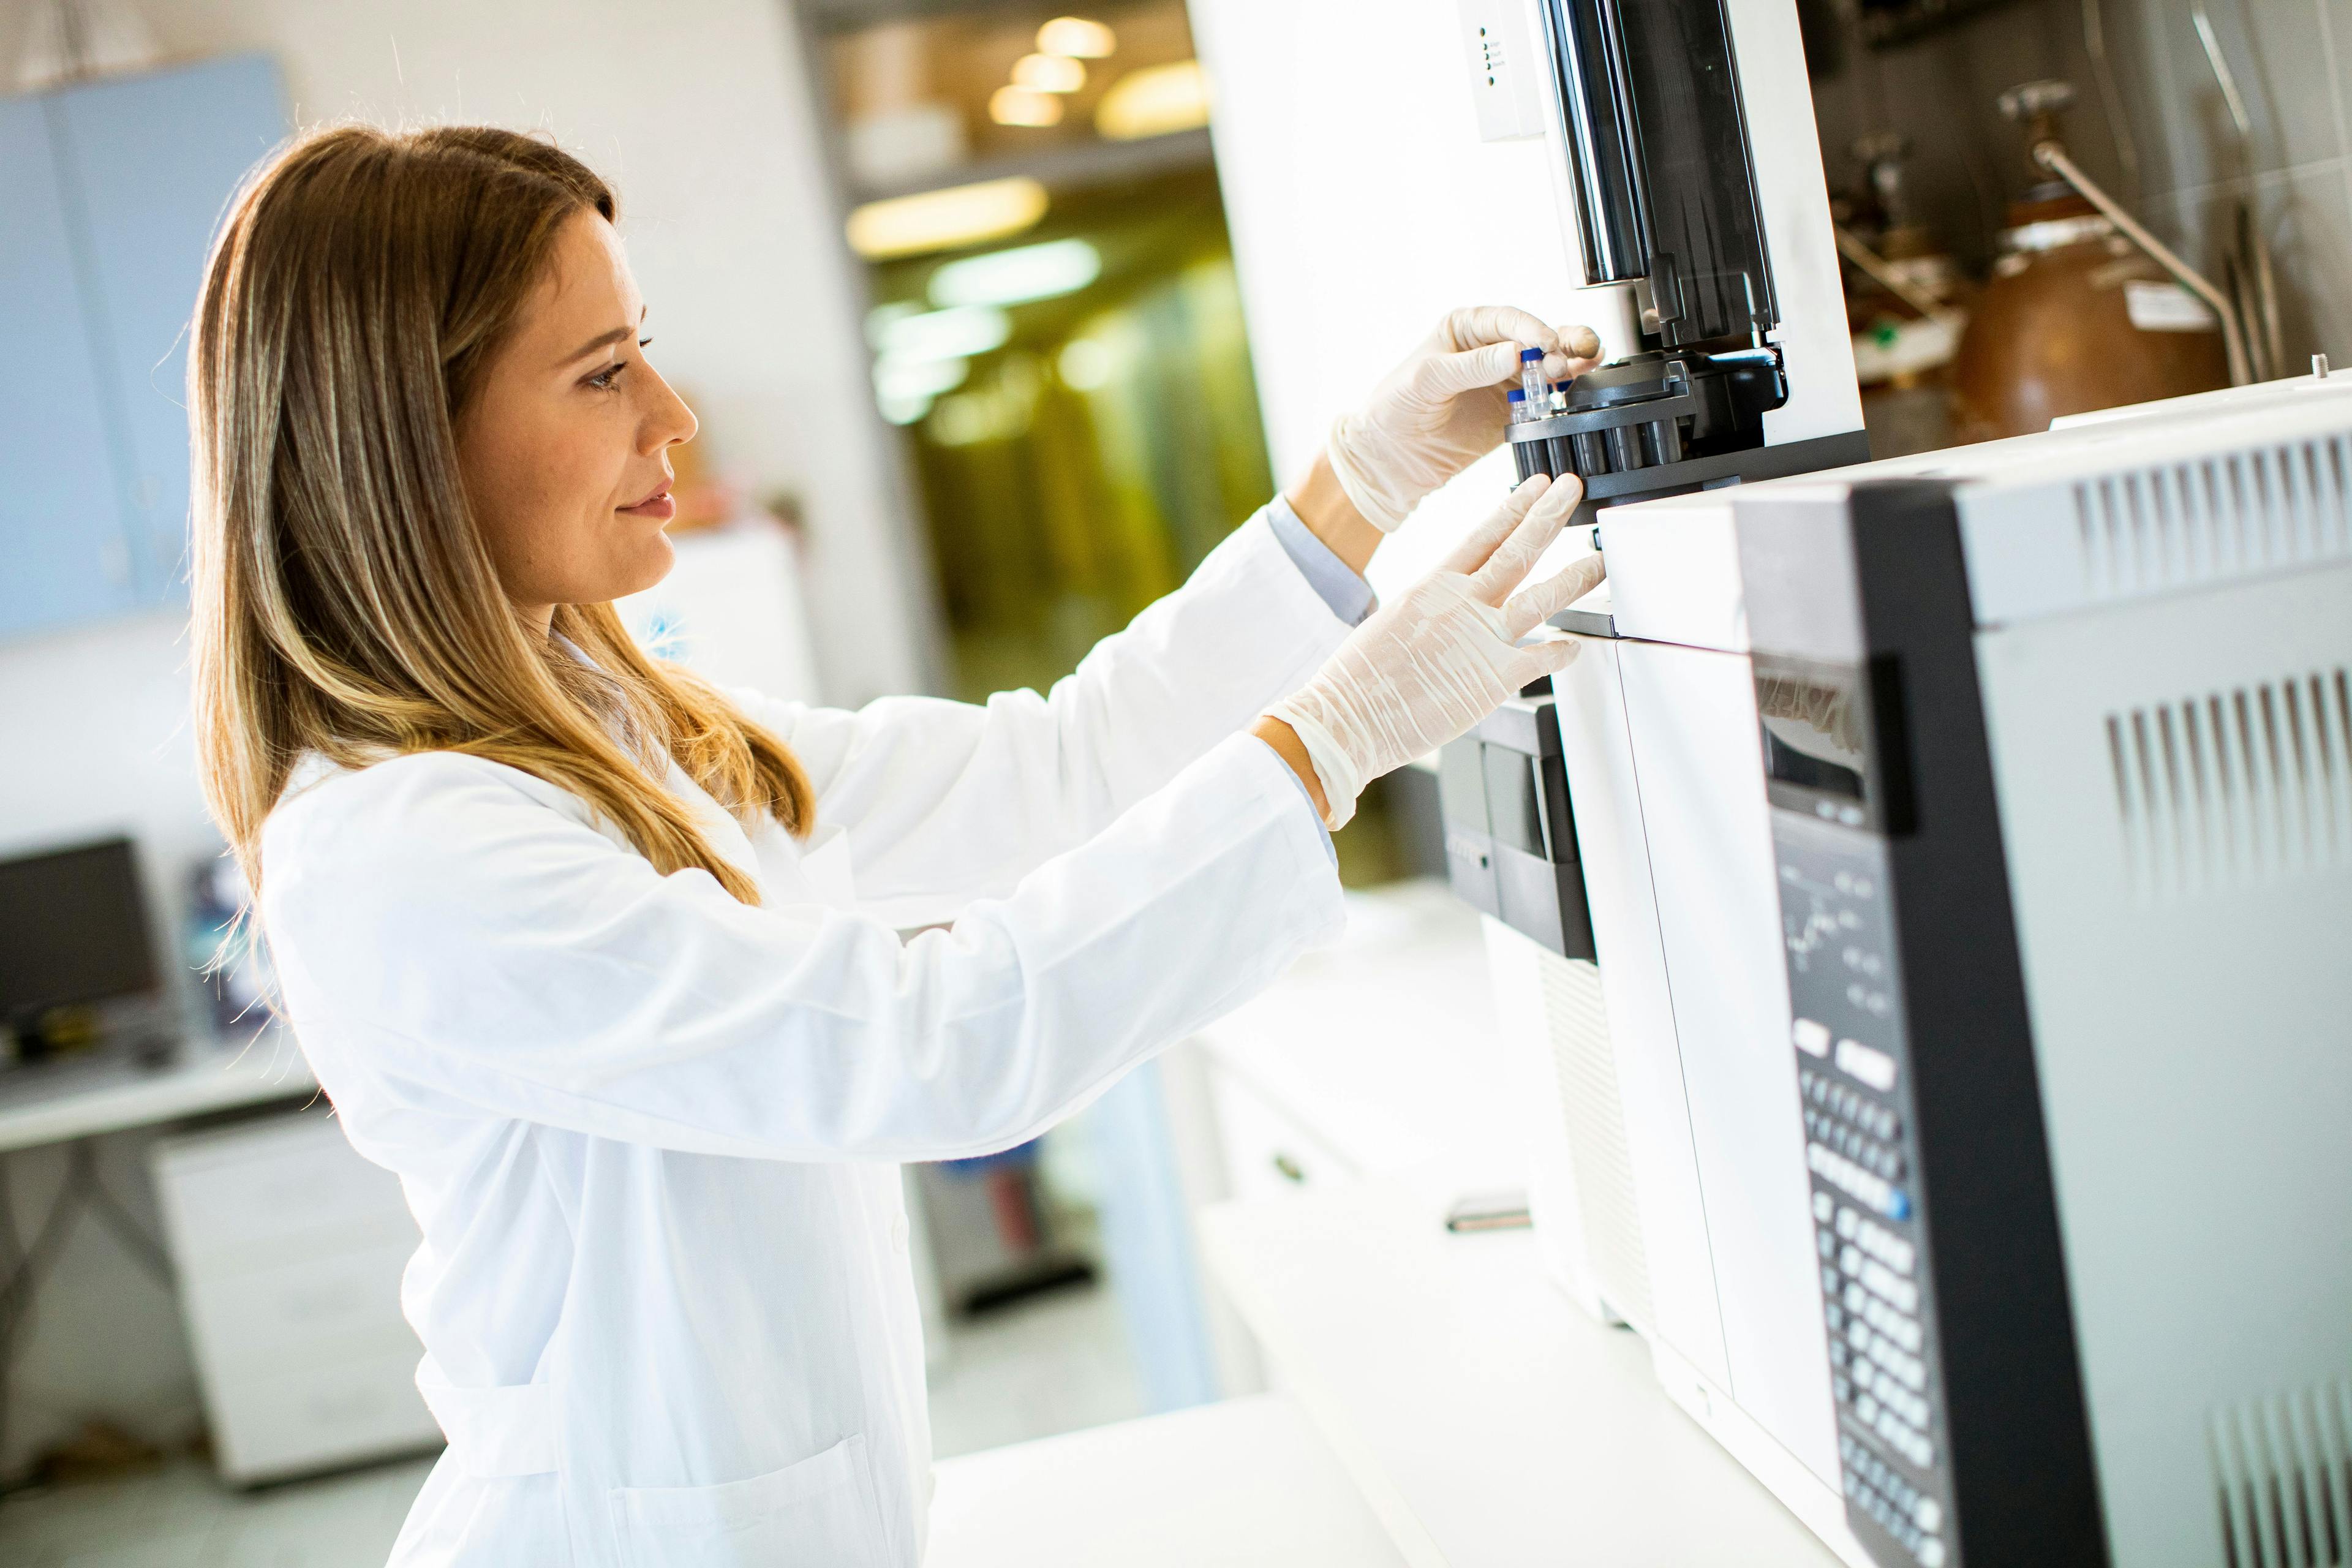 Female scientist in a white lab coat putting vial with a sample for an analysis on a gas chromatograph in biomedical lab | Image Credit: © BGStock72 - stock.adobe.com